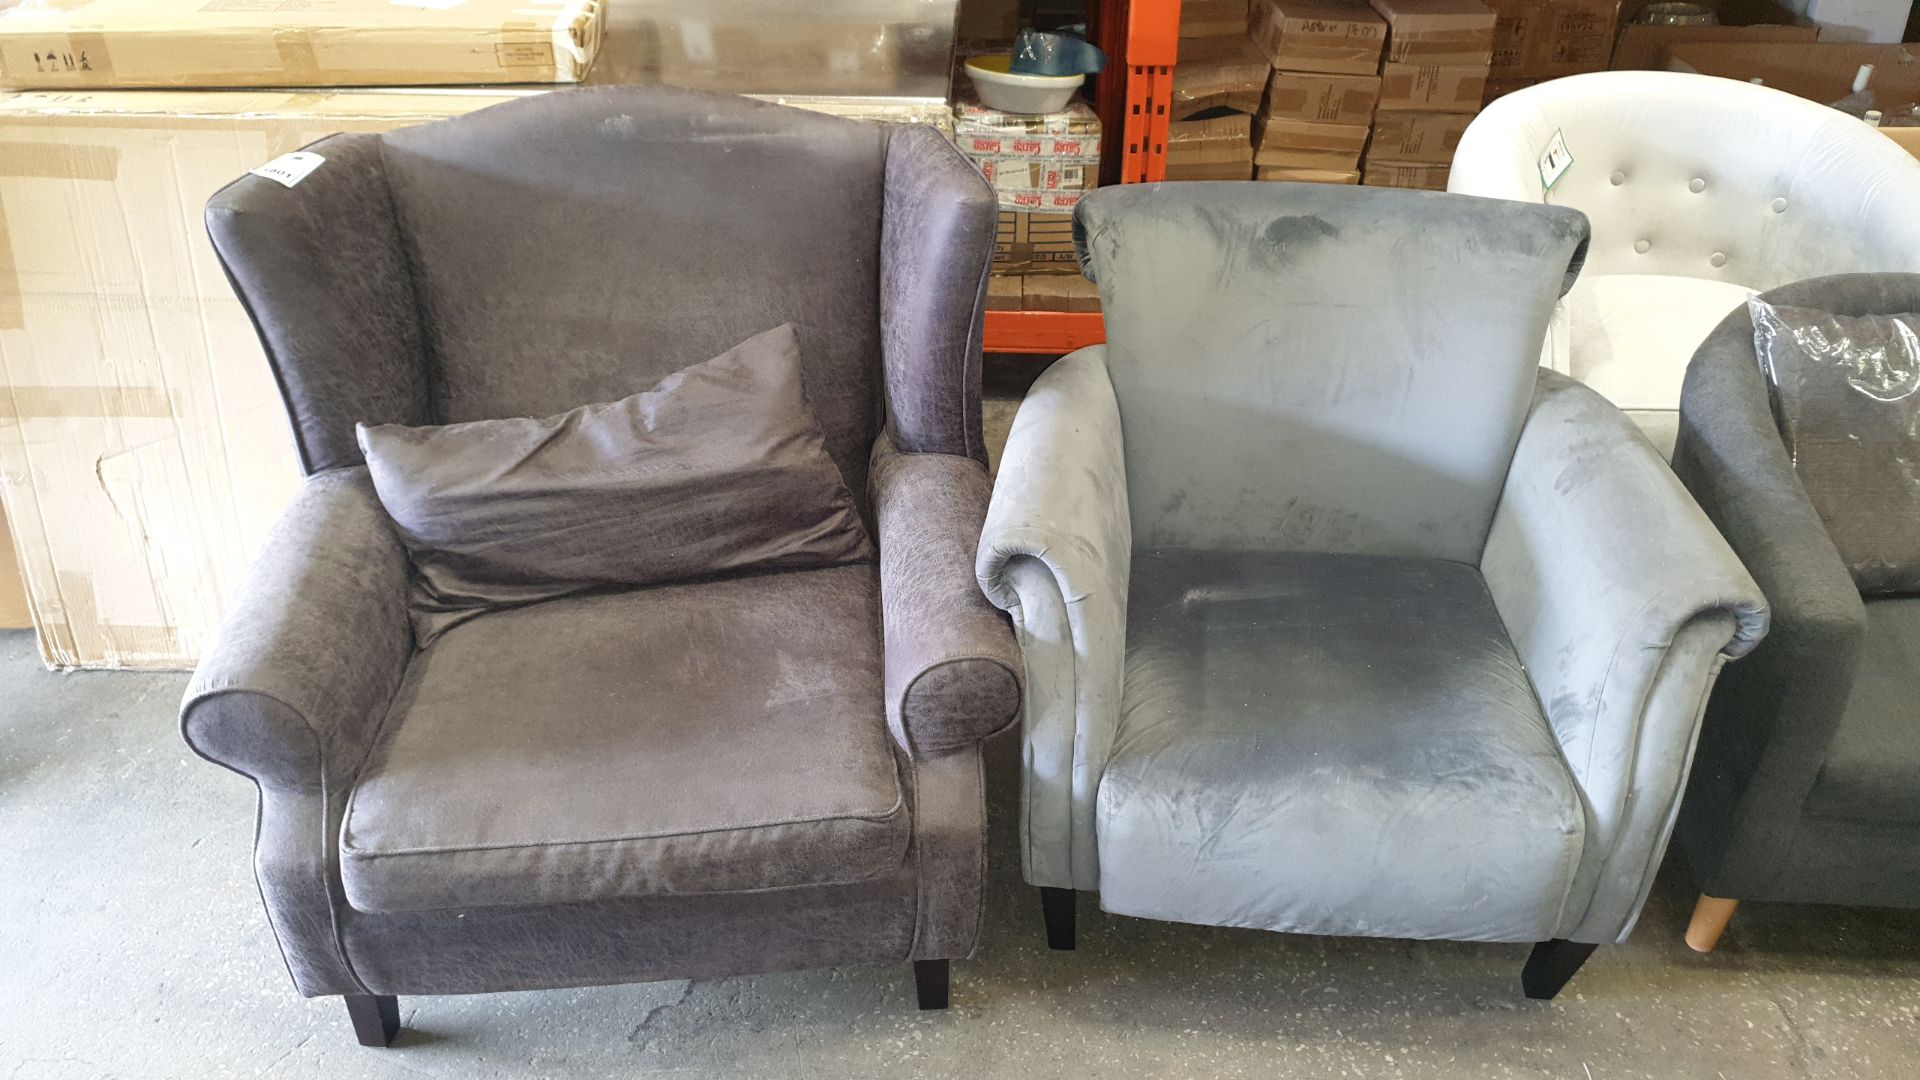 2 X SILVER CHAIRS 1 SILVER WINGED CHAIR 1 SILVER UPHOLSTERED CHAIR